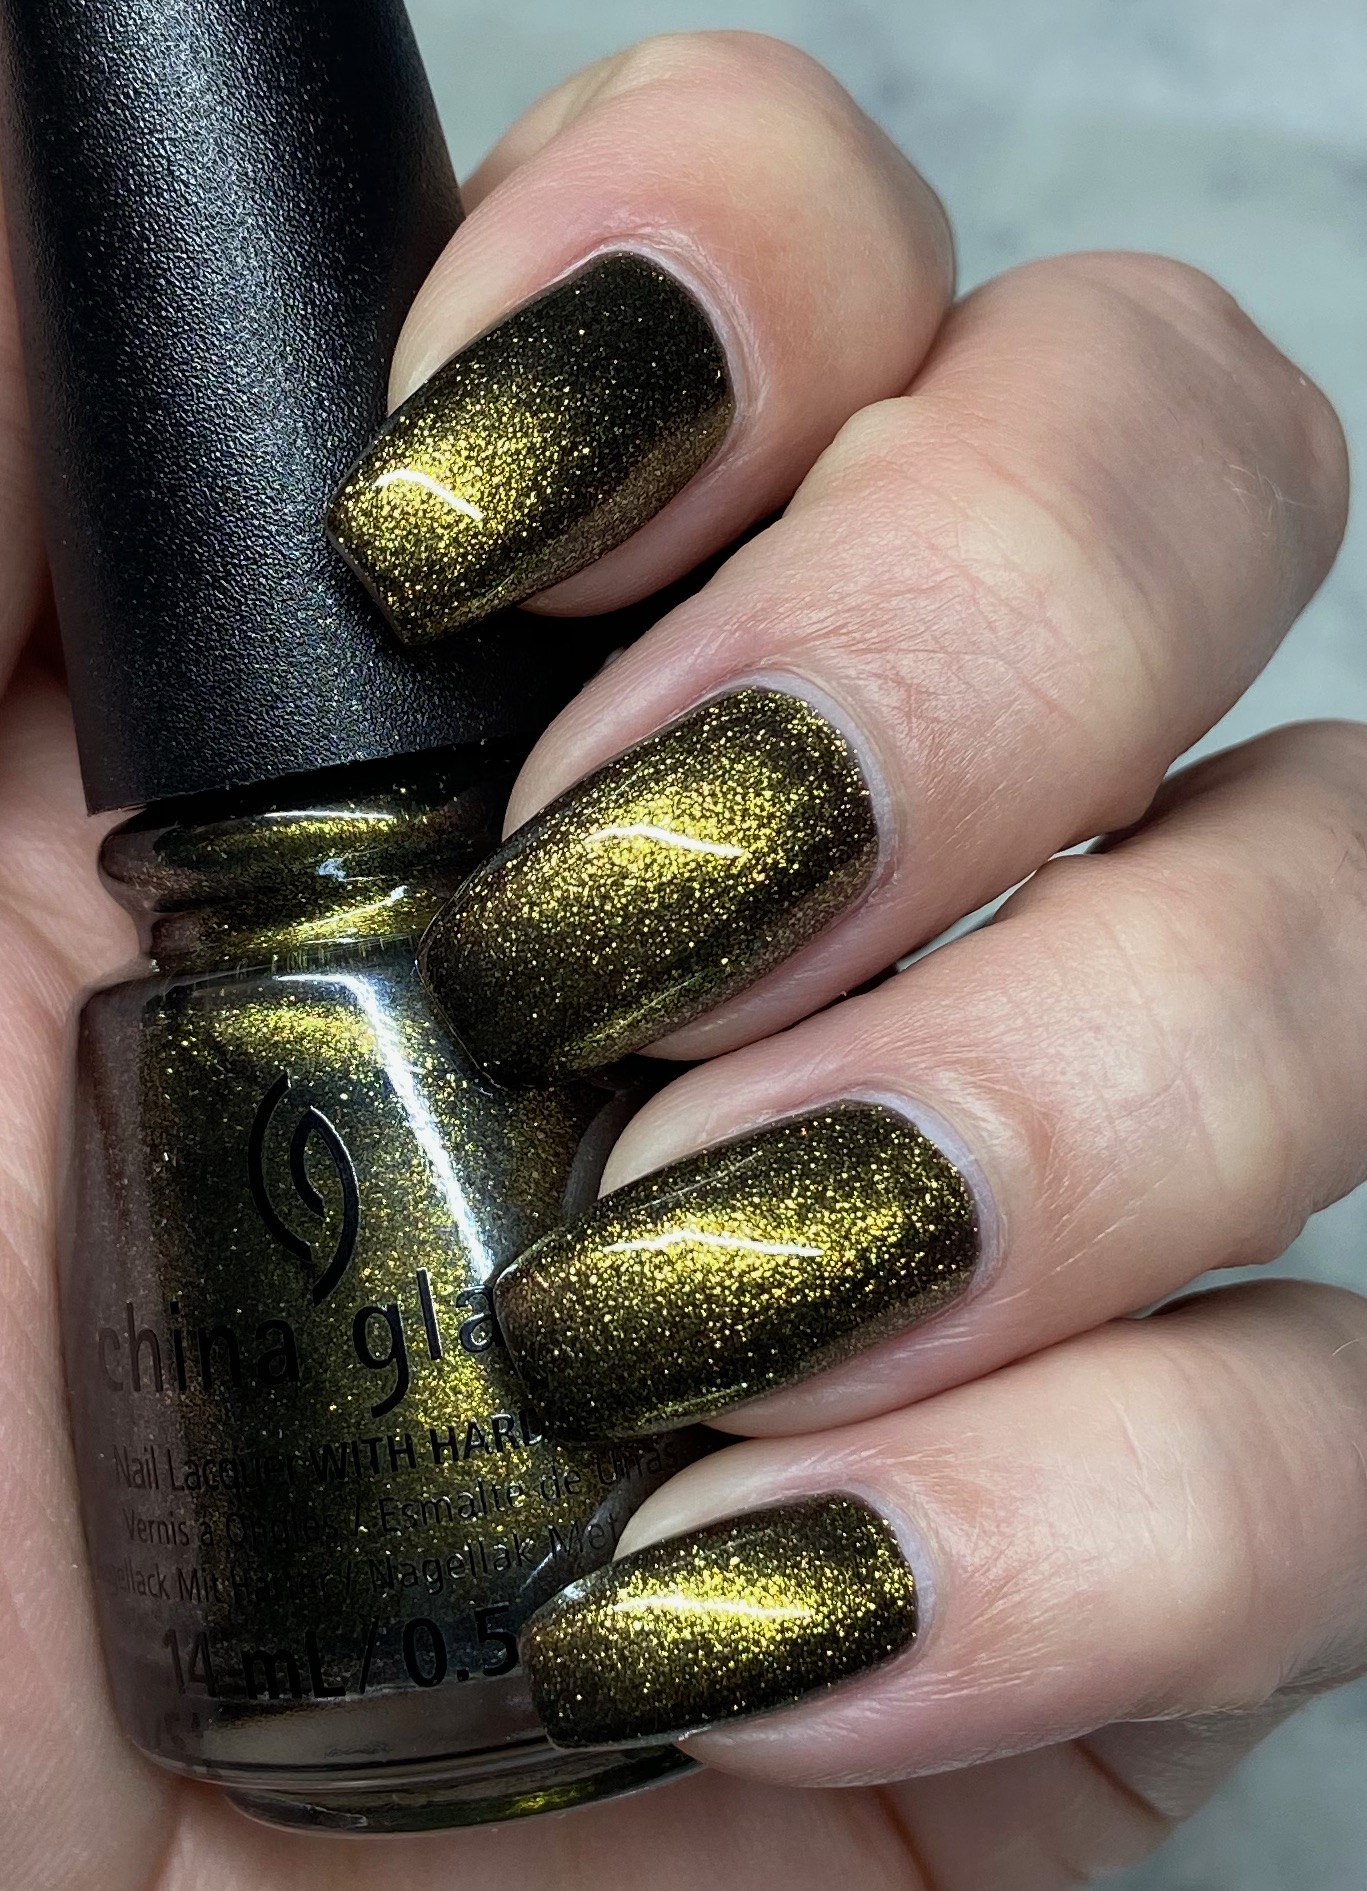 OPI Celebration Collection Holiday 2021 Swatch and Review - Jenae's Nails